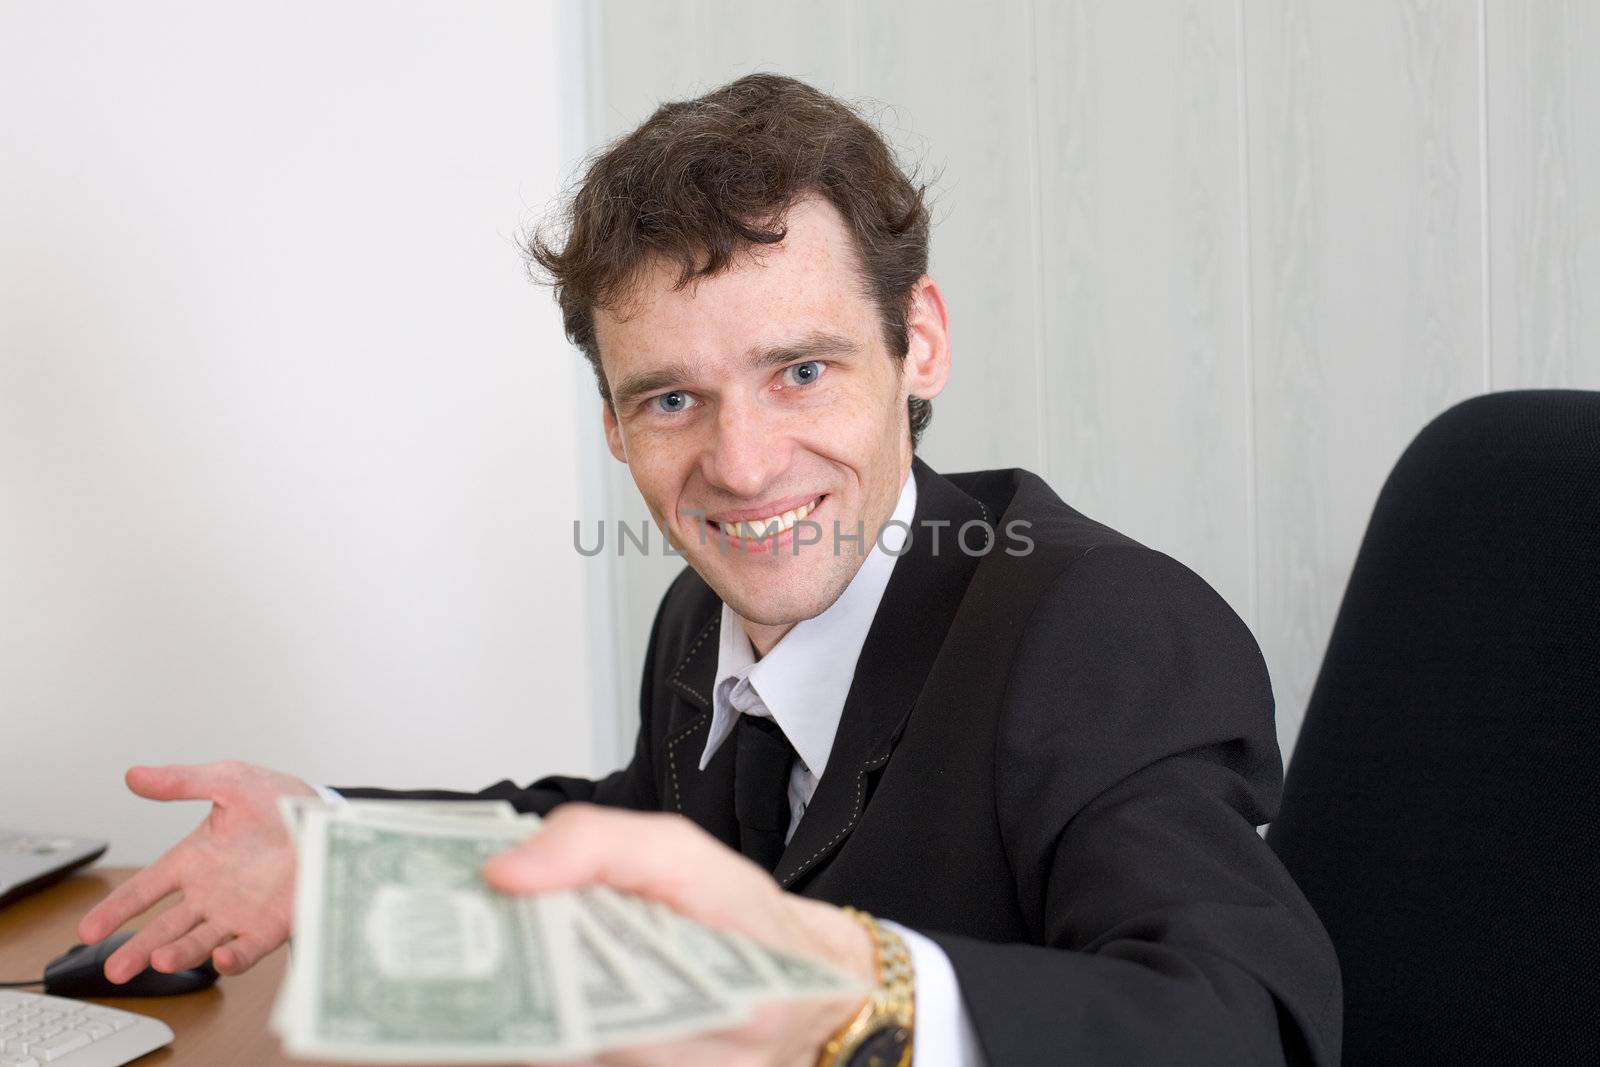 The happy man stretches a pack of dollars